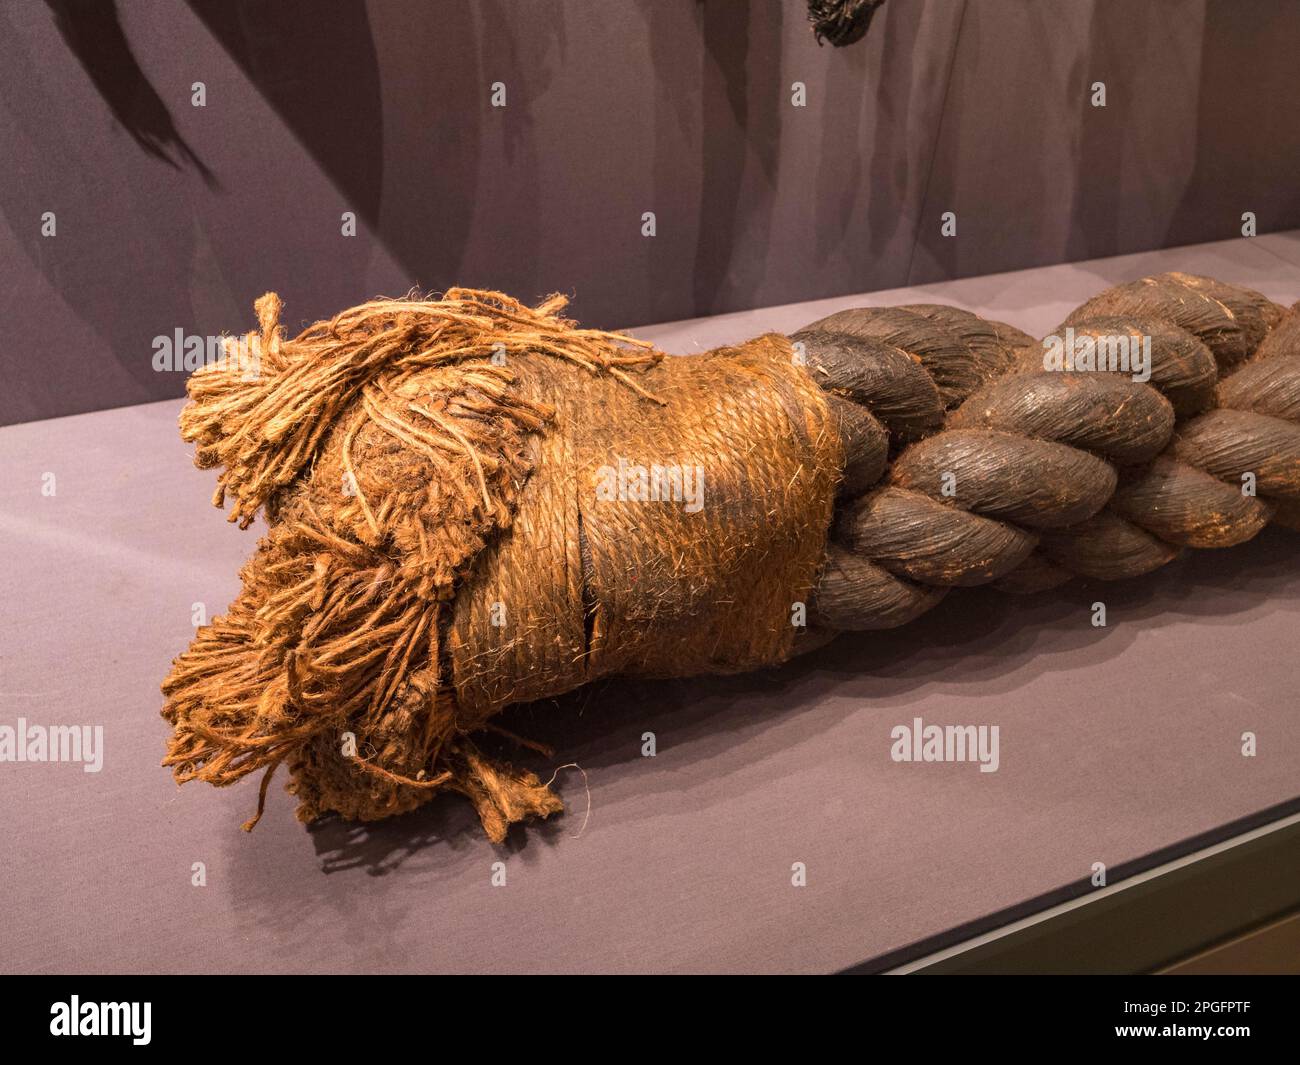 A section of early 20th century anchor cable from HMS Victory on display in the Ropery Gallery, Historic Dockyard Chatham, Kent, UK. Stock Photo